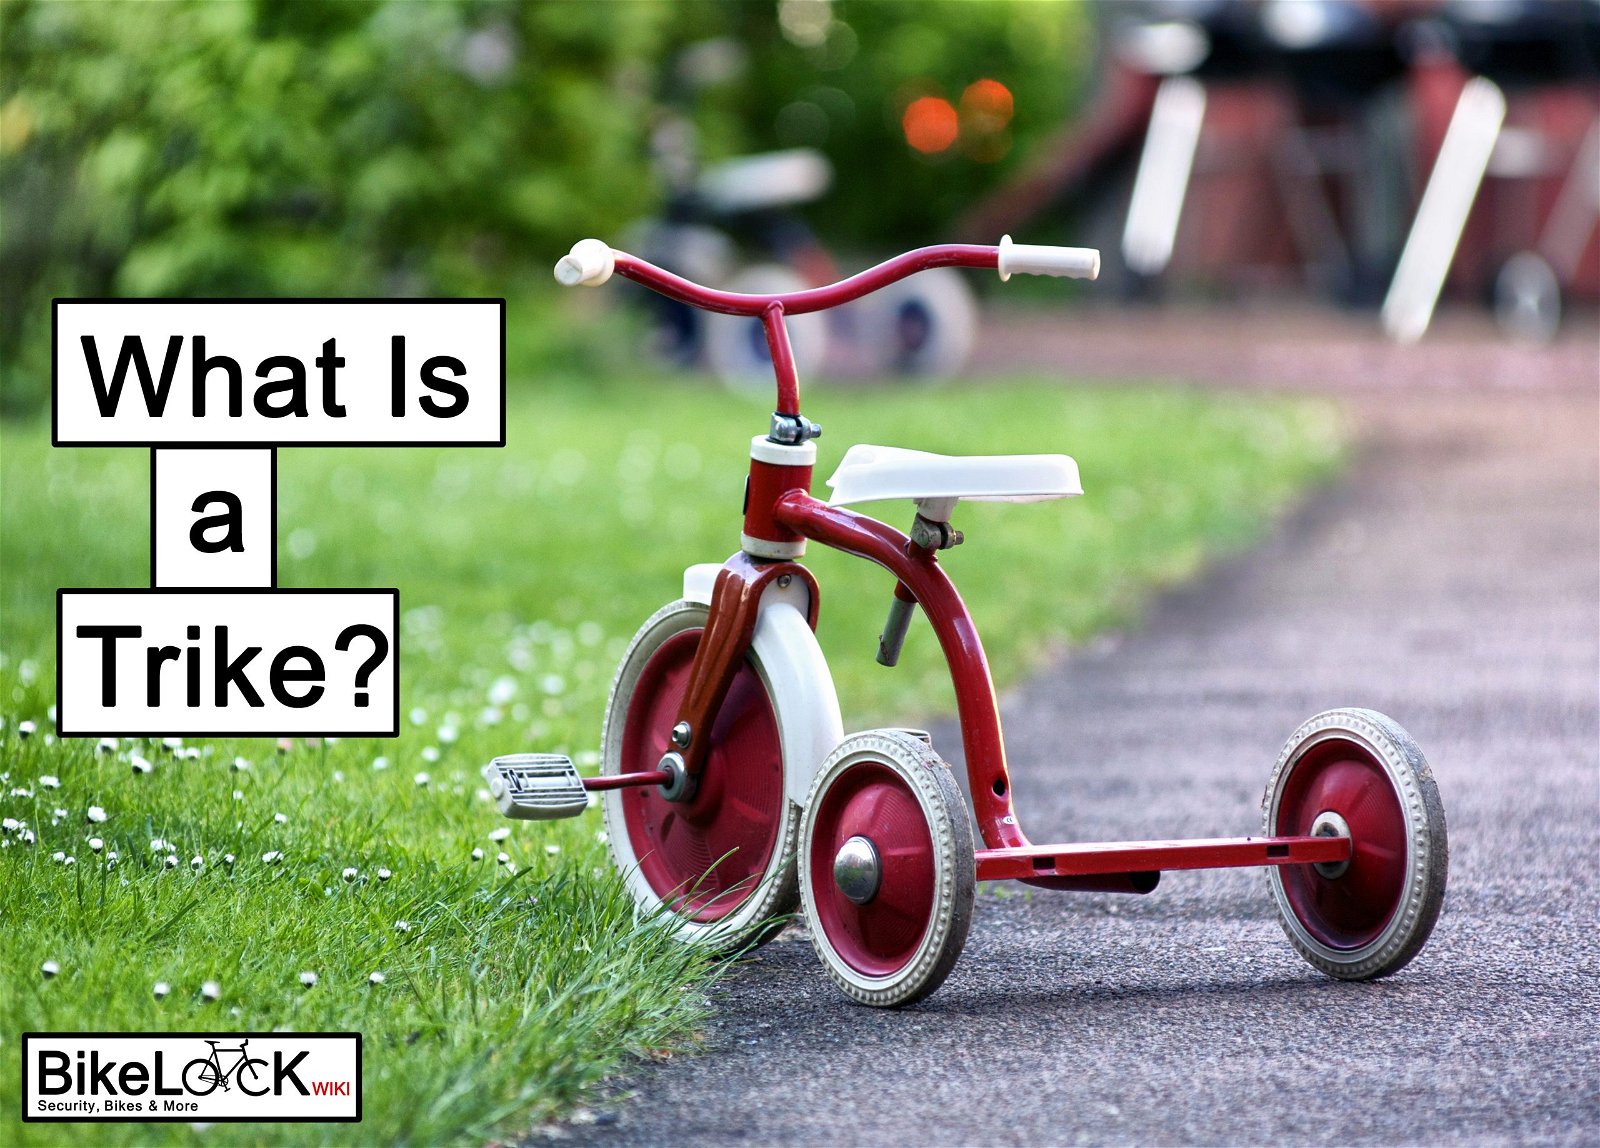 What is a trike?